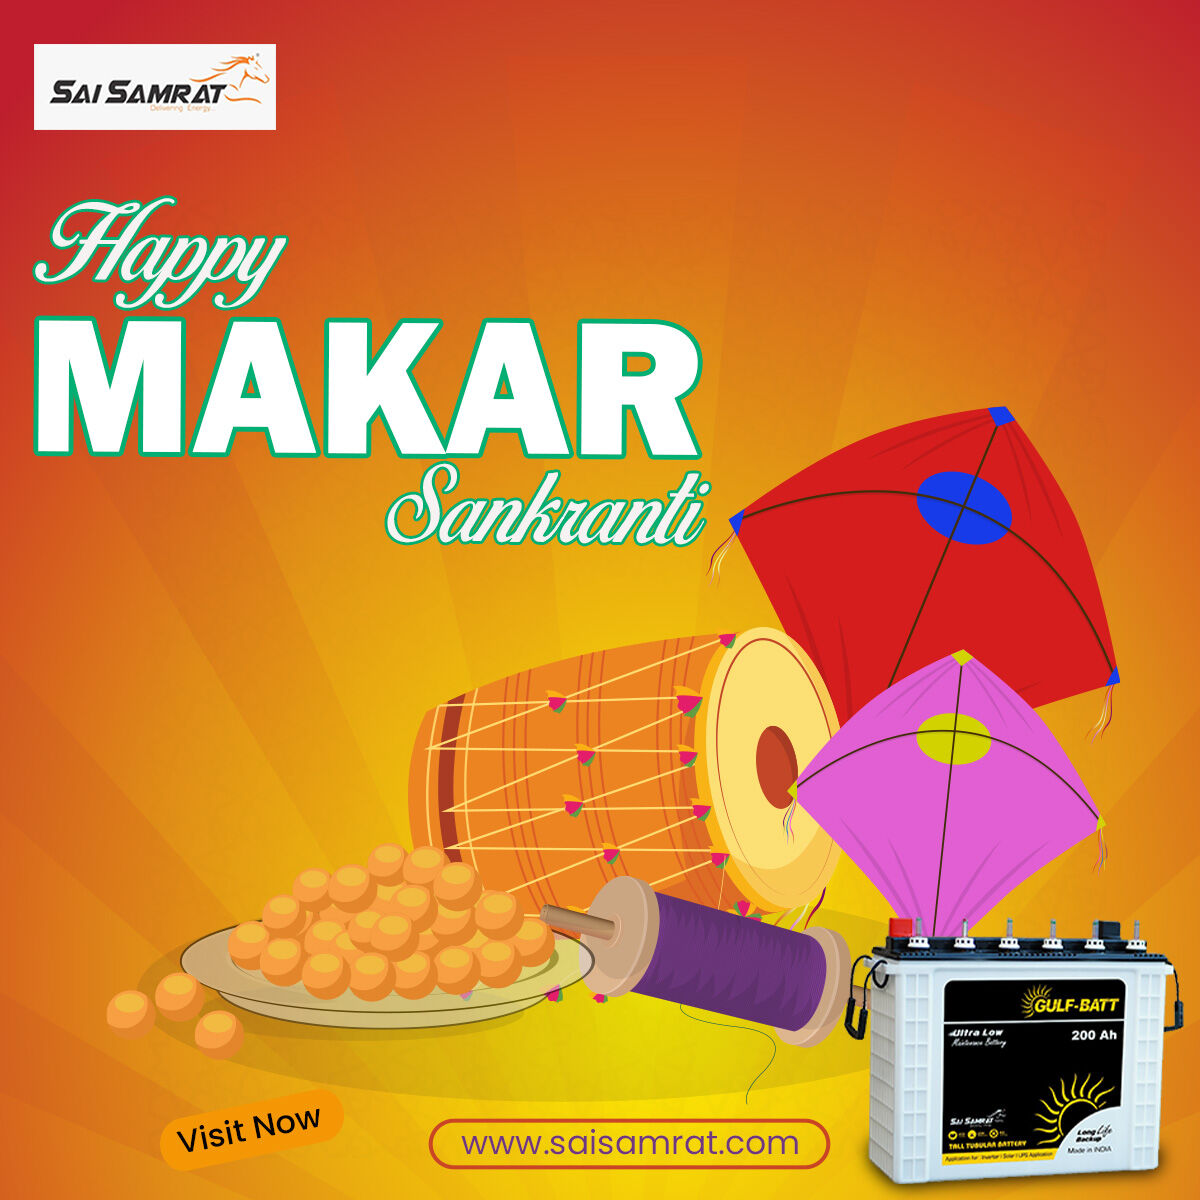 Sai Samrat wishes you a Makar Sankranti filled with joy and warmth! 🌾🪁 May your aspirations soar as high as the kites in the sky. Happy Makar Sankranti! #SaiSamratJoy #MakarSankrantiCelebration #FestiveVibes #KiteFlyingFun #WarmWishes #SankrantiSmiles #FamilyTraditions #Celebra